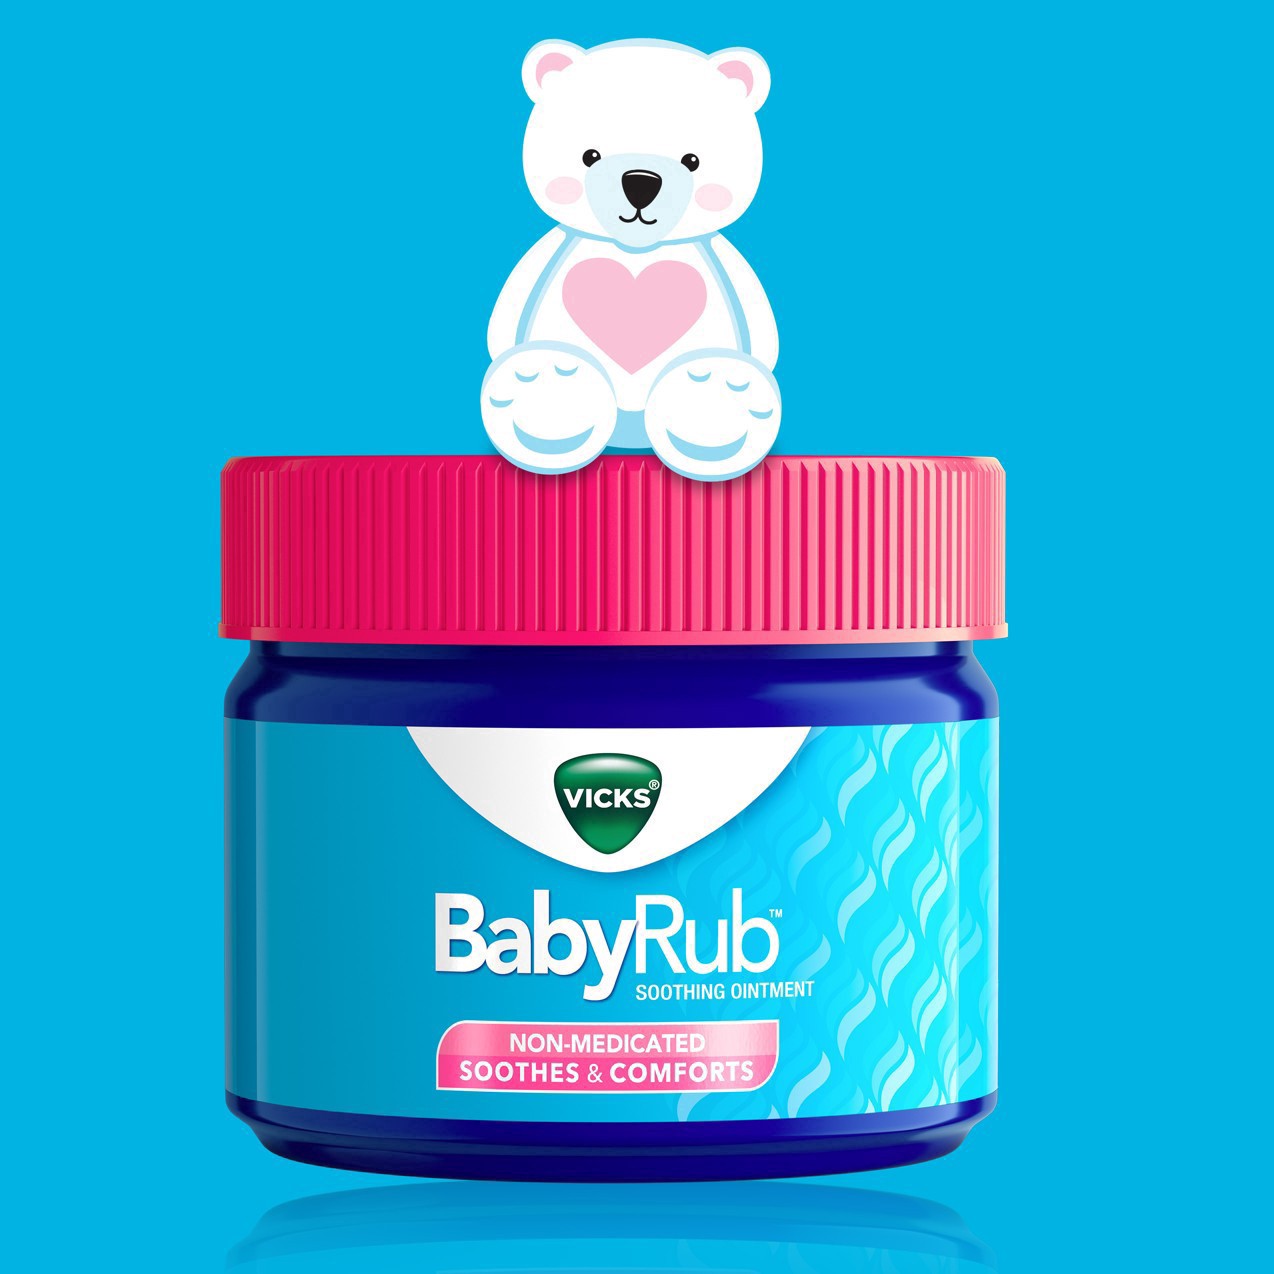 slide 65 of 78, Vicks BabyRub, Chest Rub Ointment with Soothing Aloe, Eucalyptus, Lavender, and Rosemary, from The Makers of VapoRub, 1.76 oz, 1.76 oz